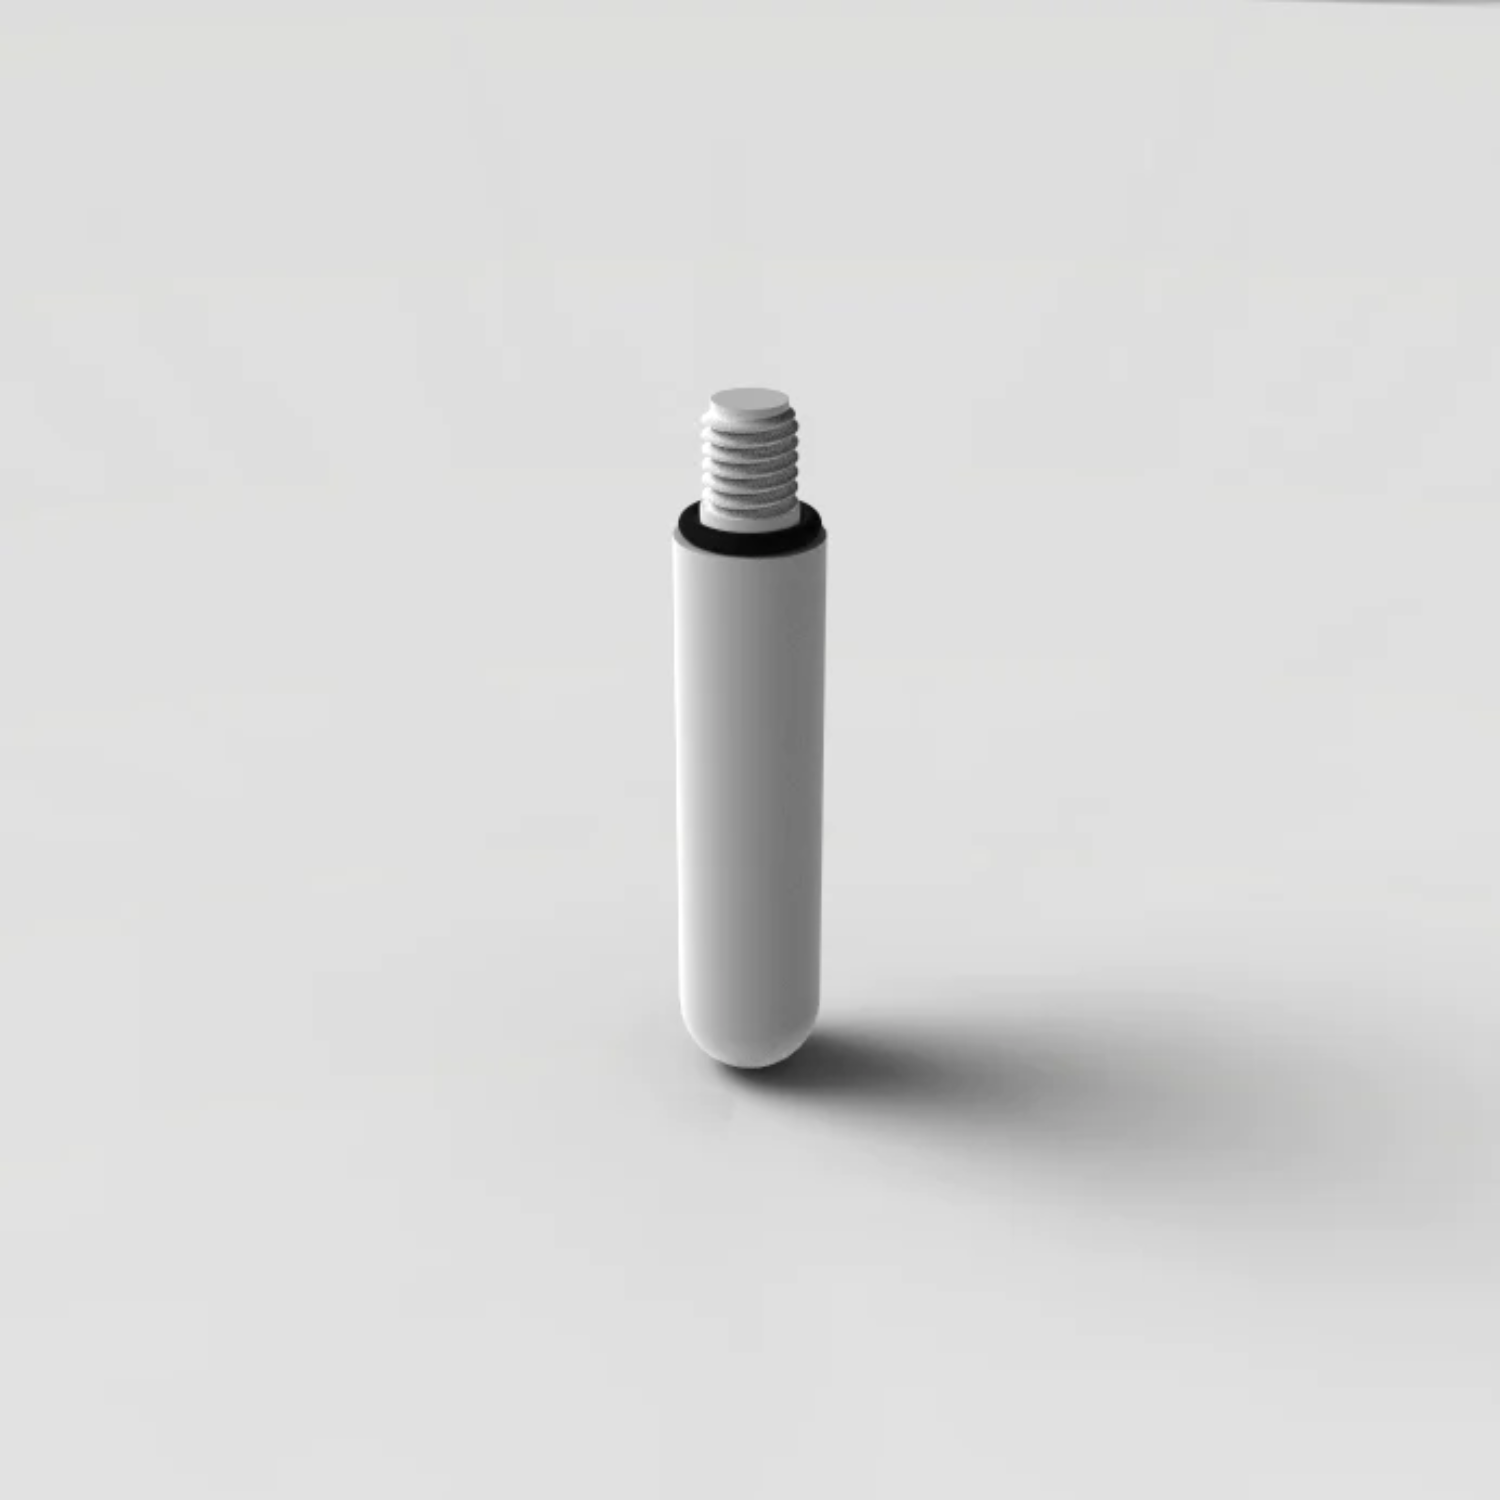 Image of an 8mm thread on style white pencil tip for slimline white canes from Ambutech